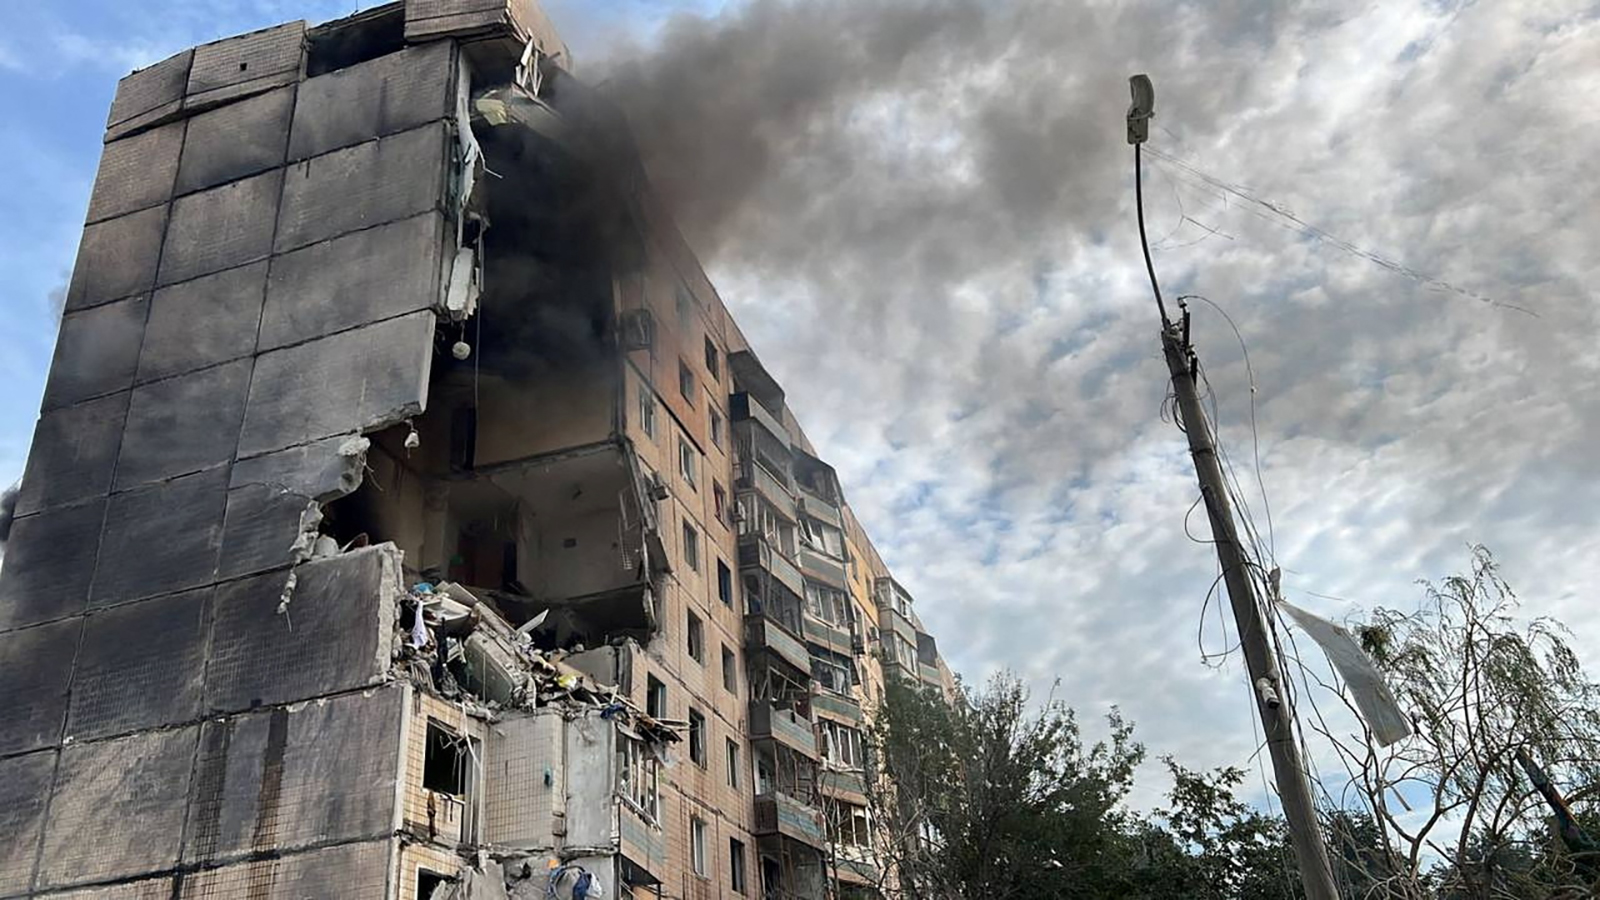 This picture shows an apartment building heavily damaged by a Russian missile strike in Kryvyi Rih, Ukraine on July 31.